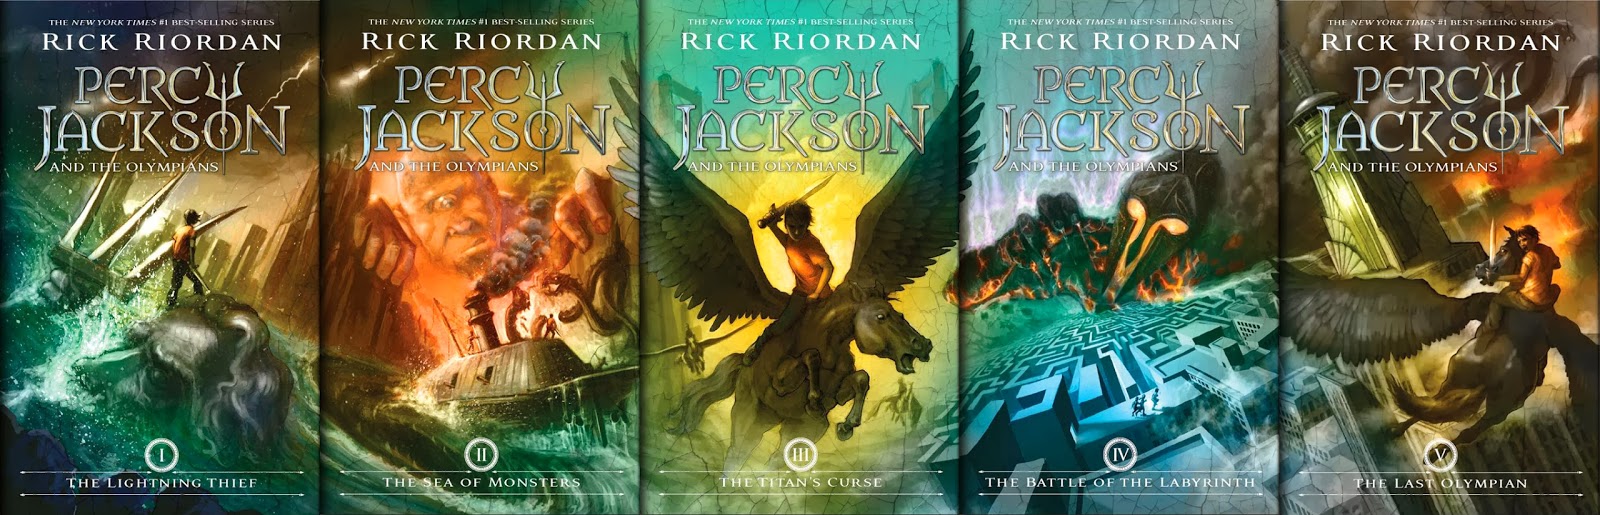 percy_jackson_and_the_olympians.jpg